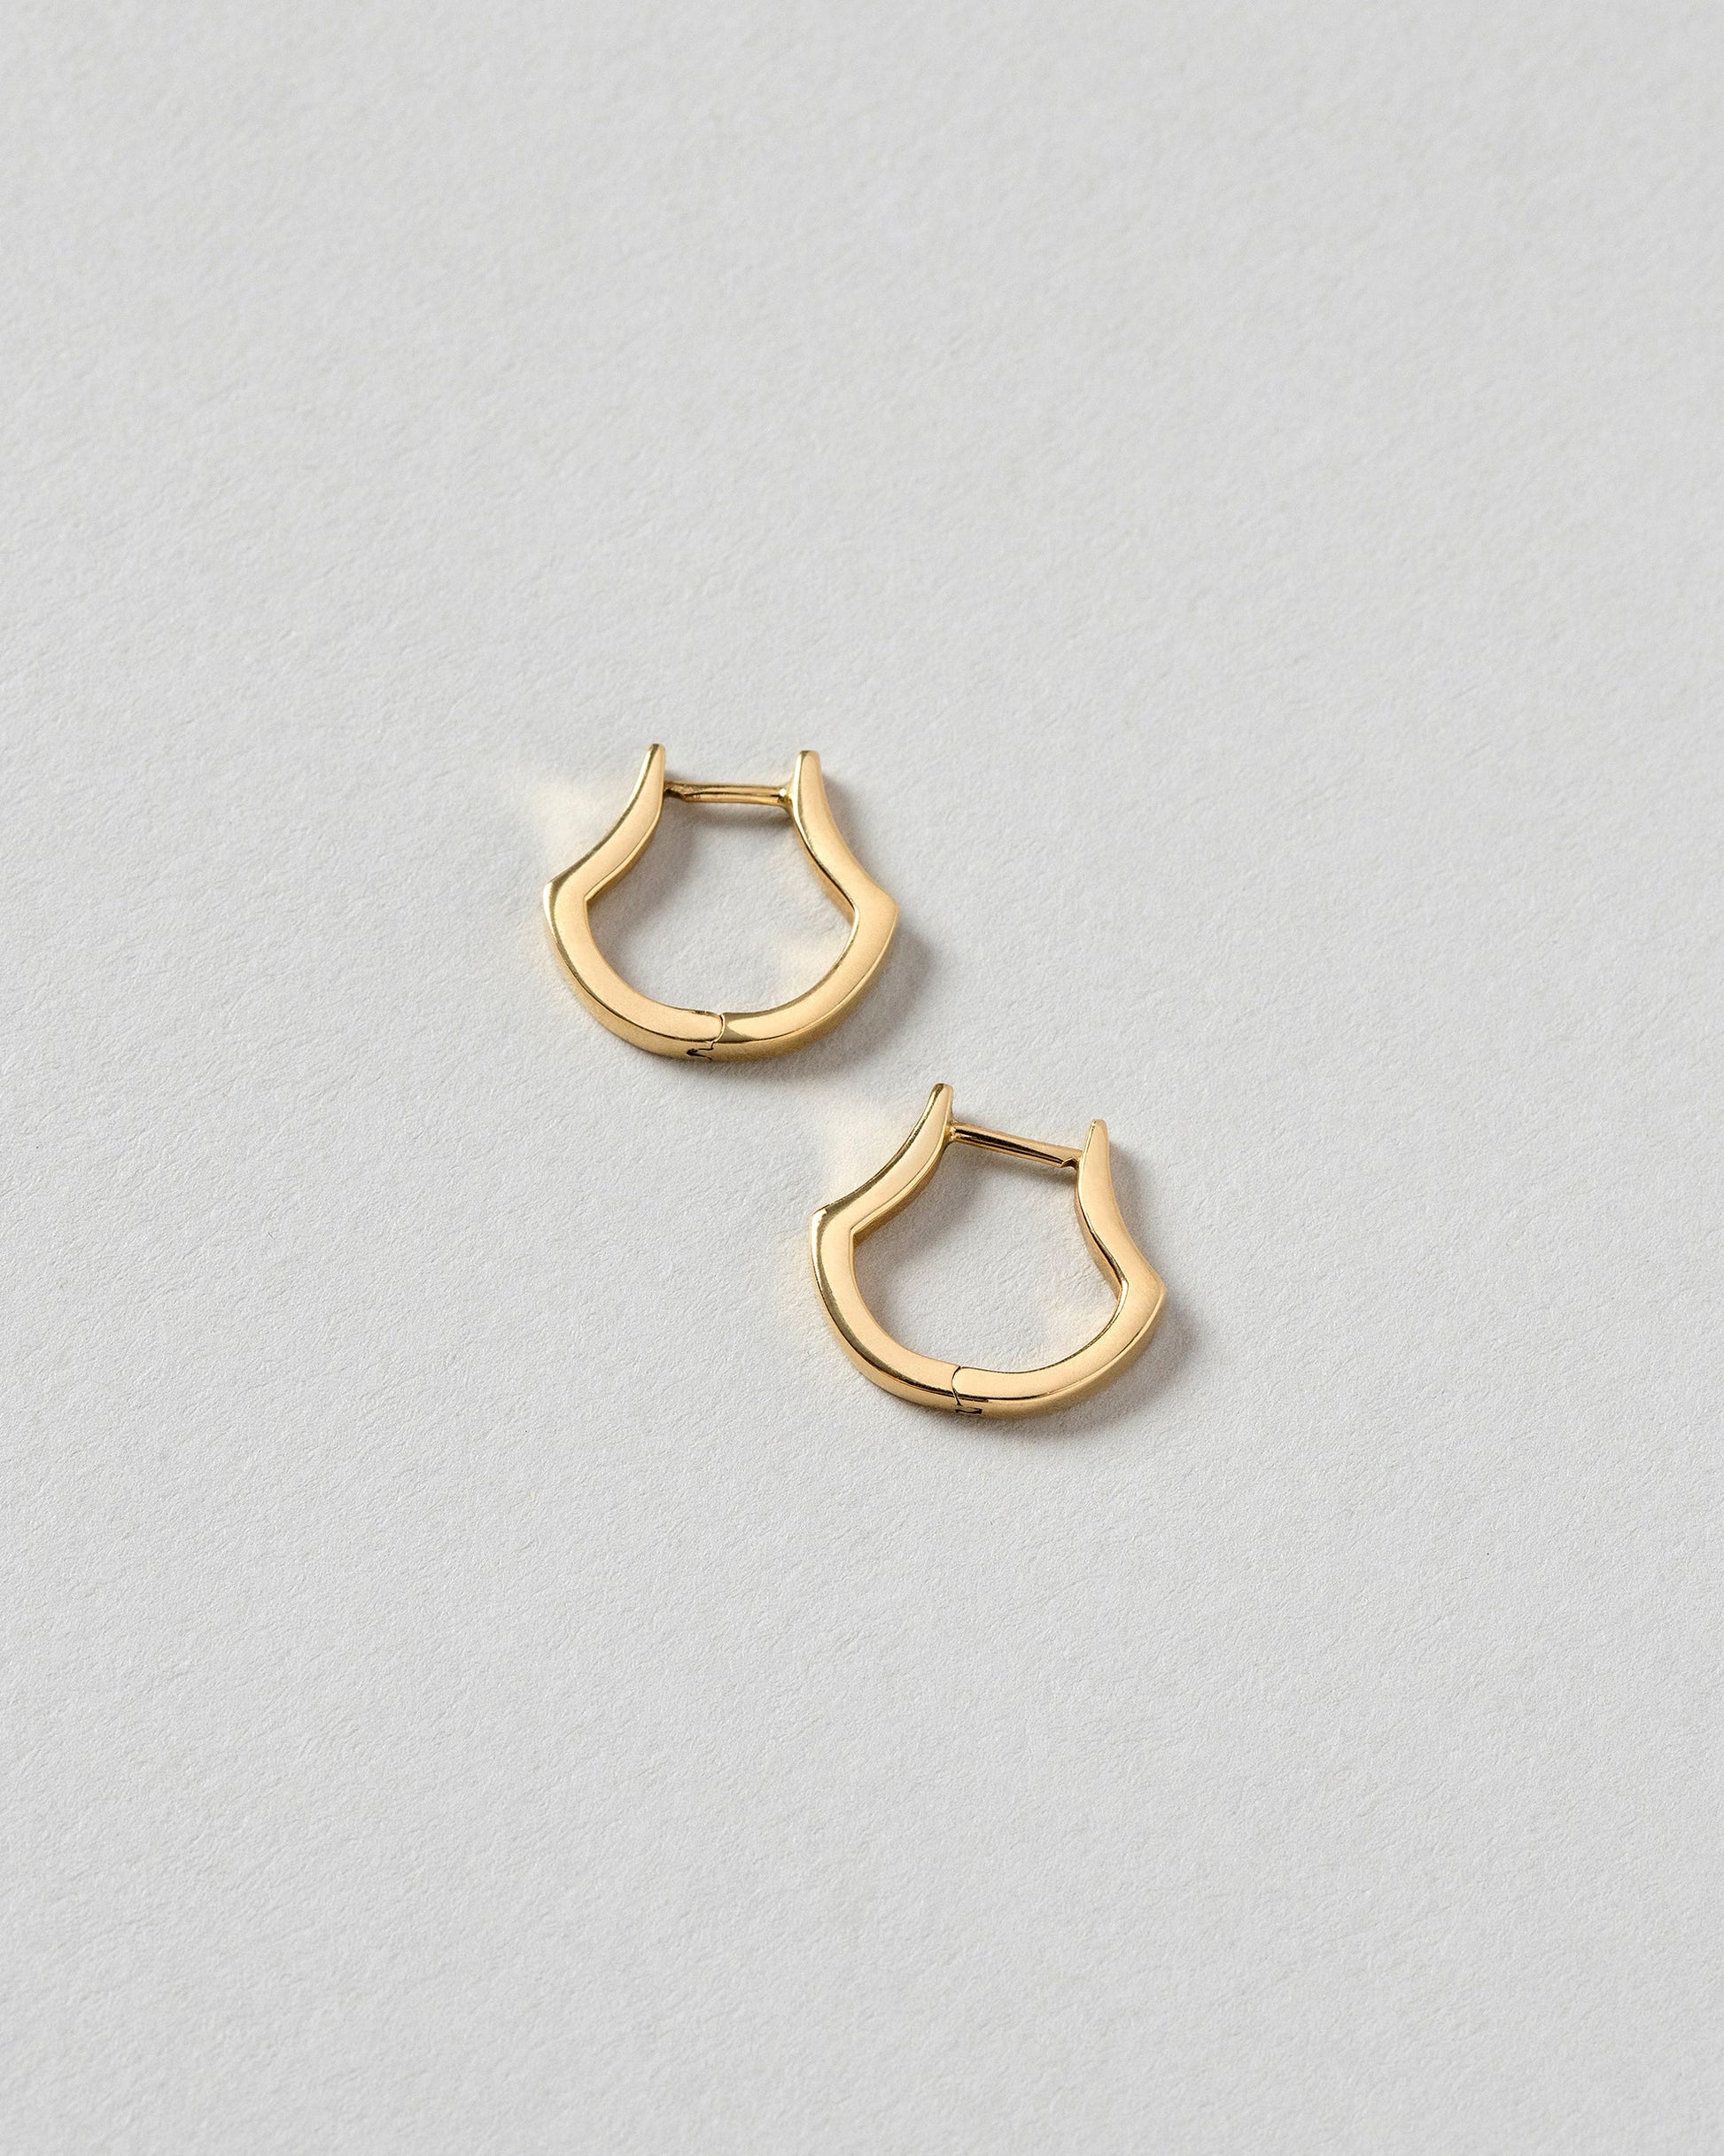 Everyday Hoop Earrings Small (13mm) Gold Filled